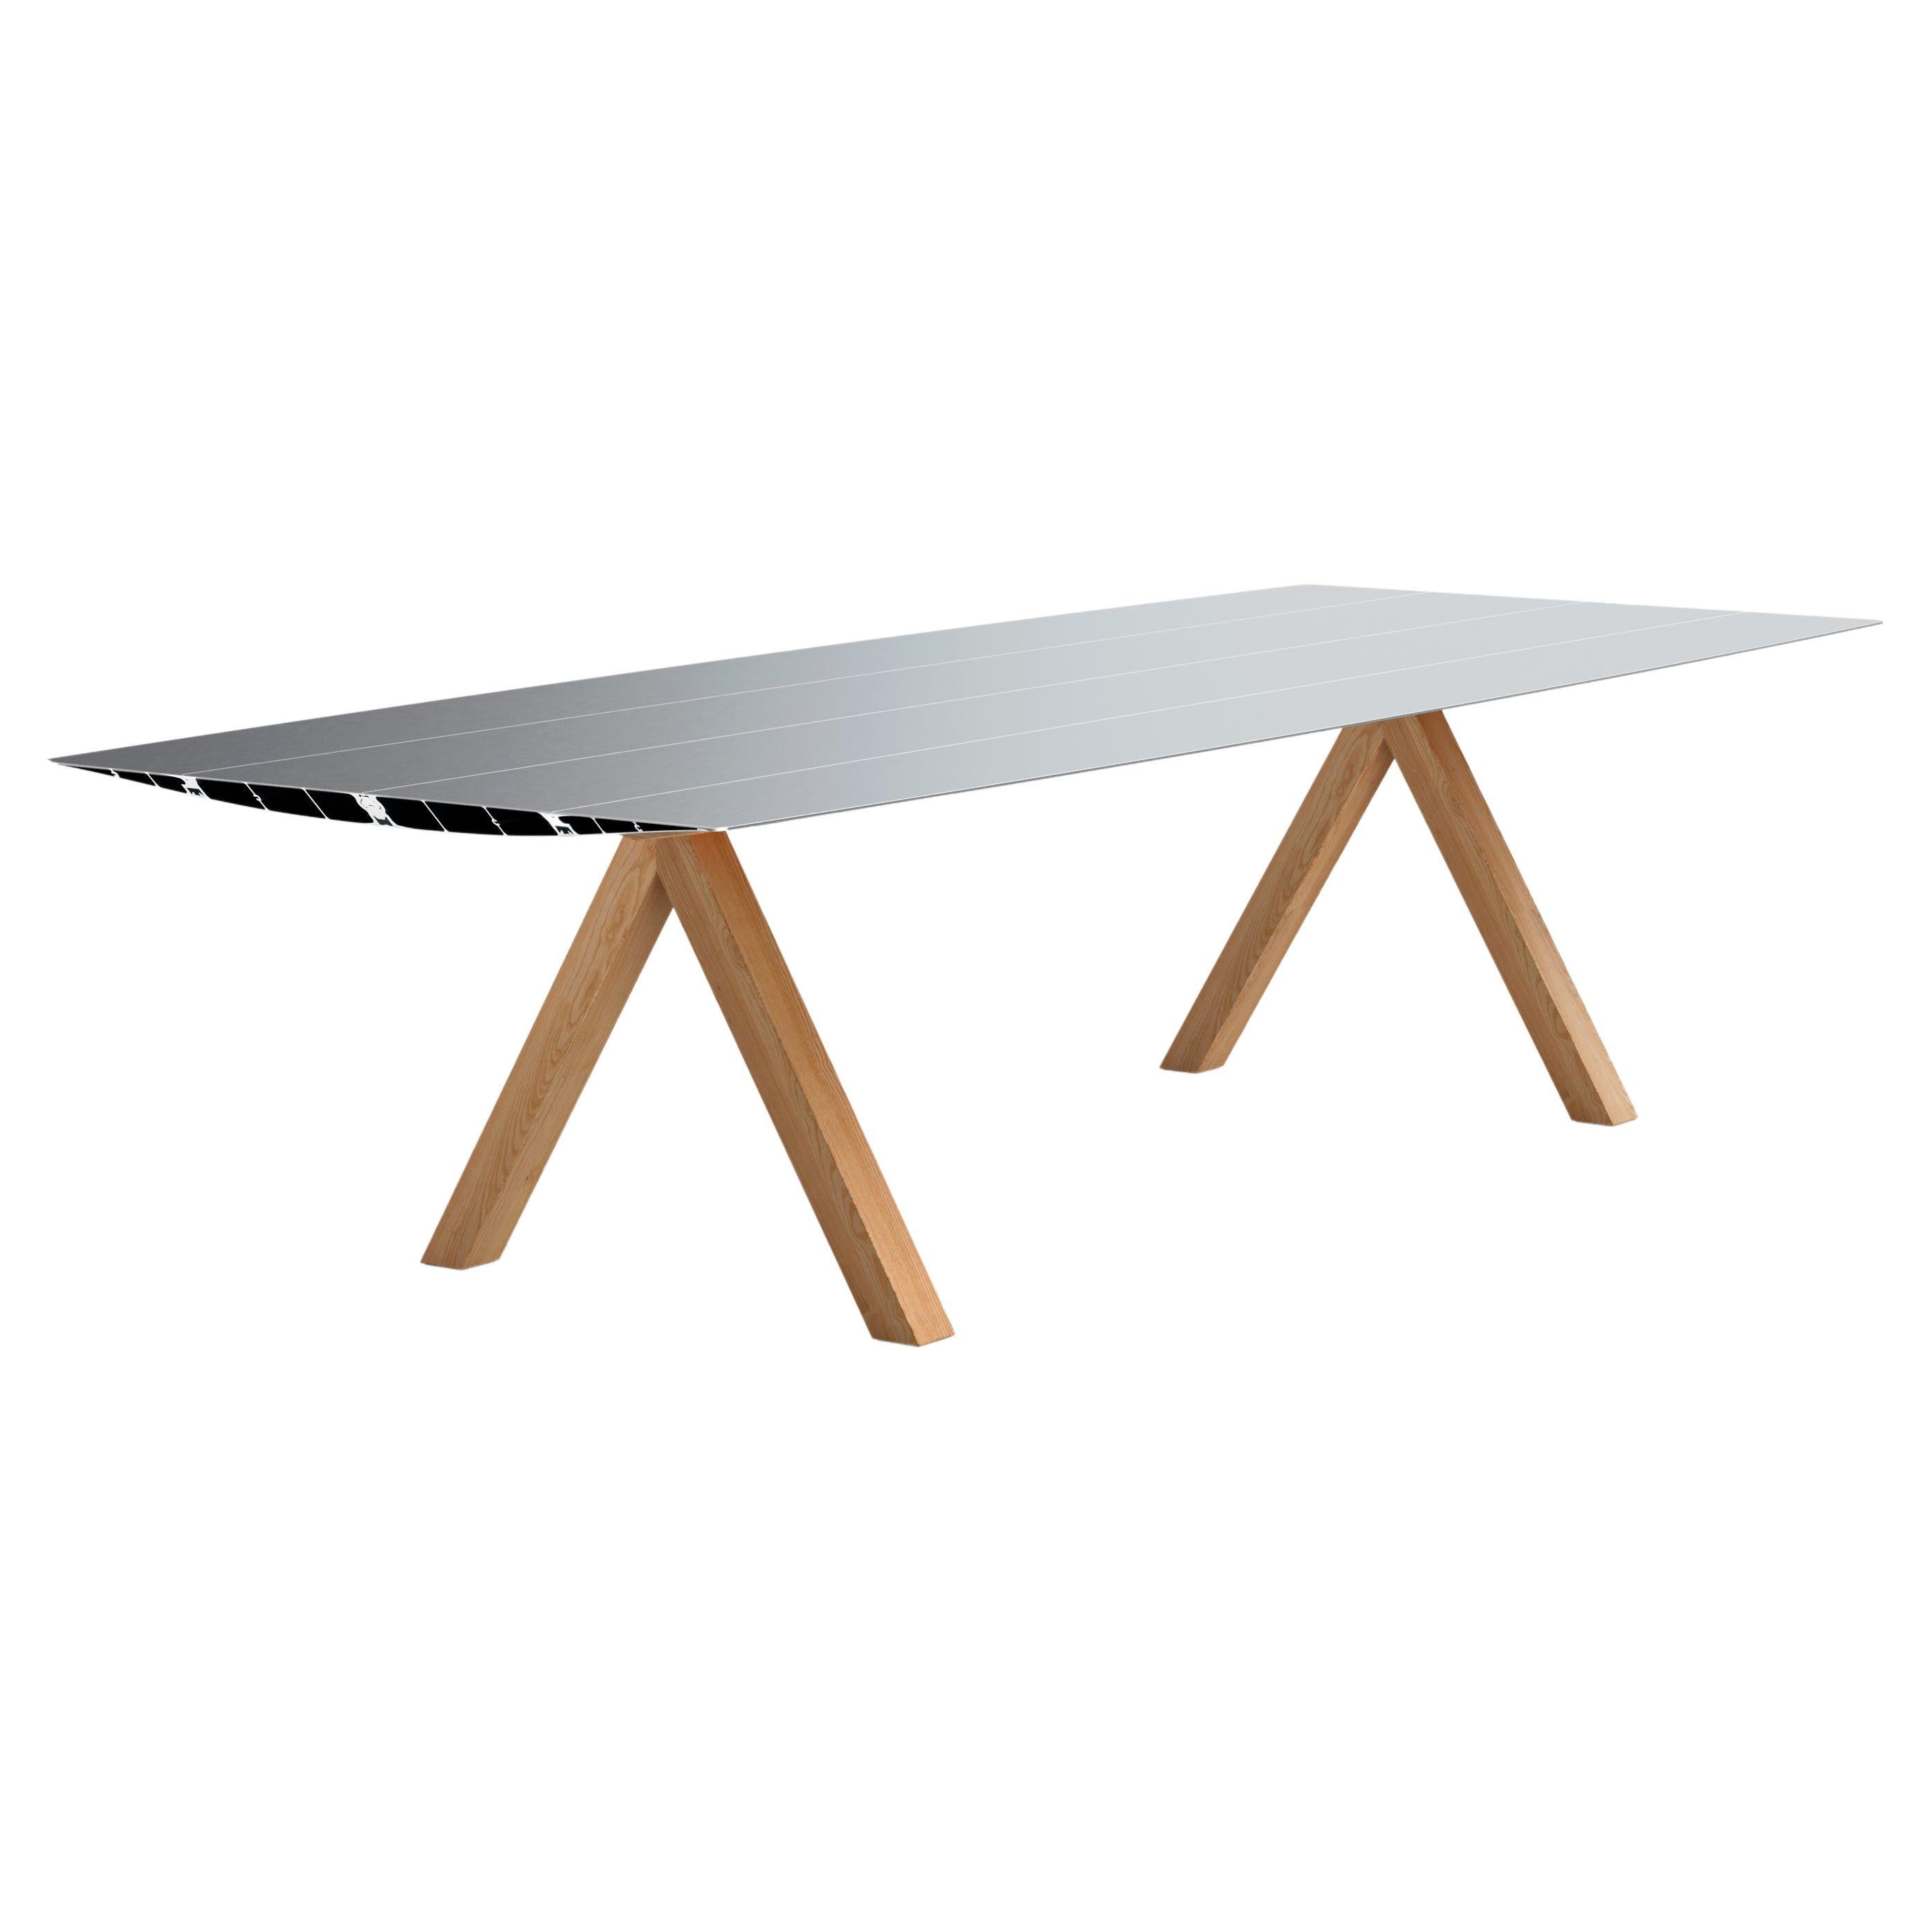 Dining table / table, model "Table B" by Konstantin Grcic Aluminum top wood legs For Sale